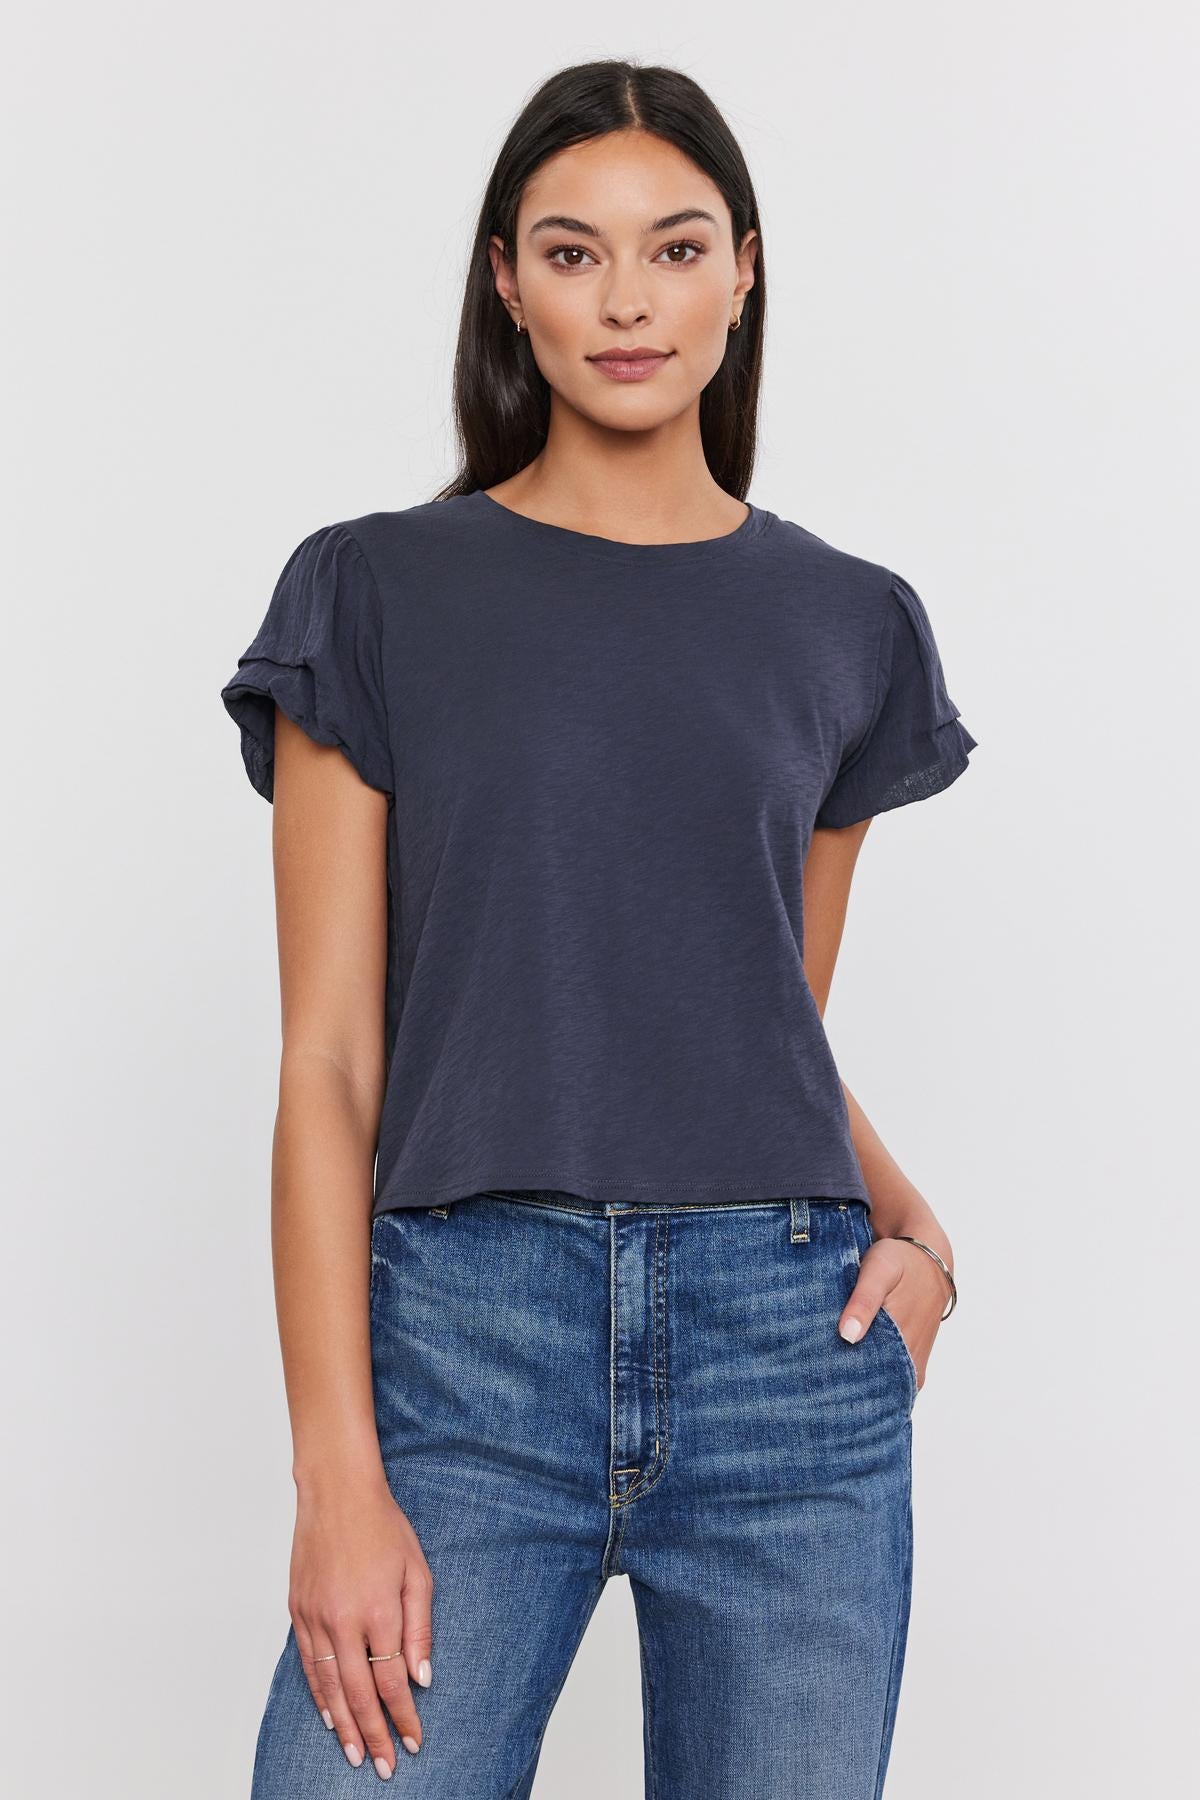 A woman in a Velvet by Graham & Spencer DELLA TEE with pleated sleeve detail and blue jeans standing against a white background, looking directly at the camera.-36805187272897